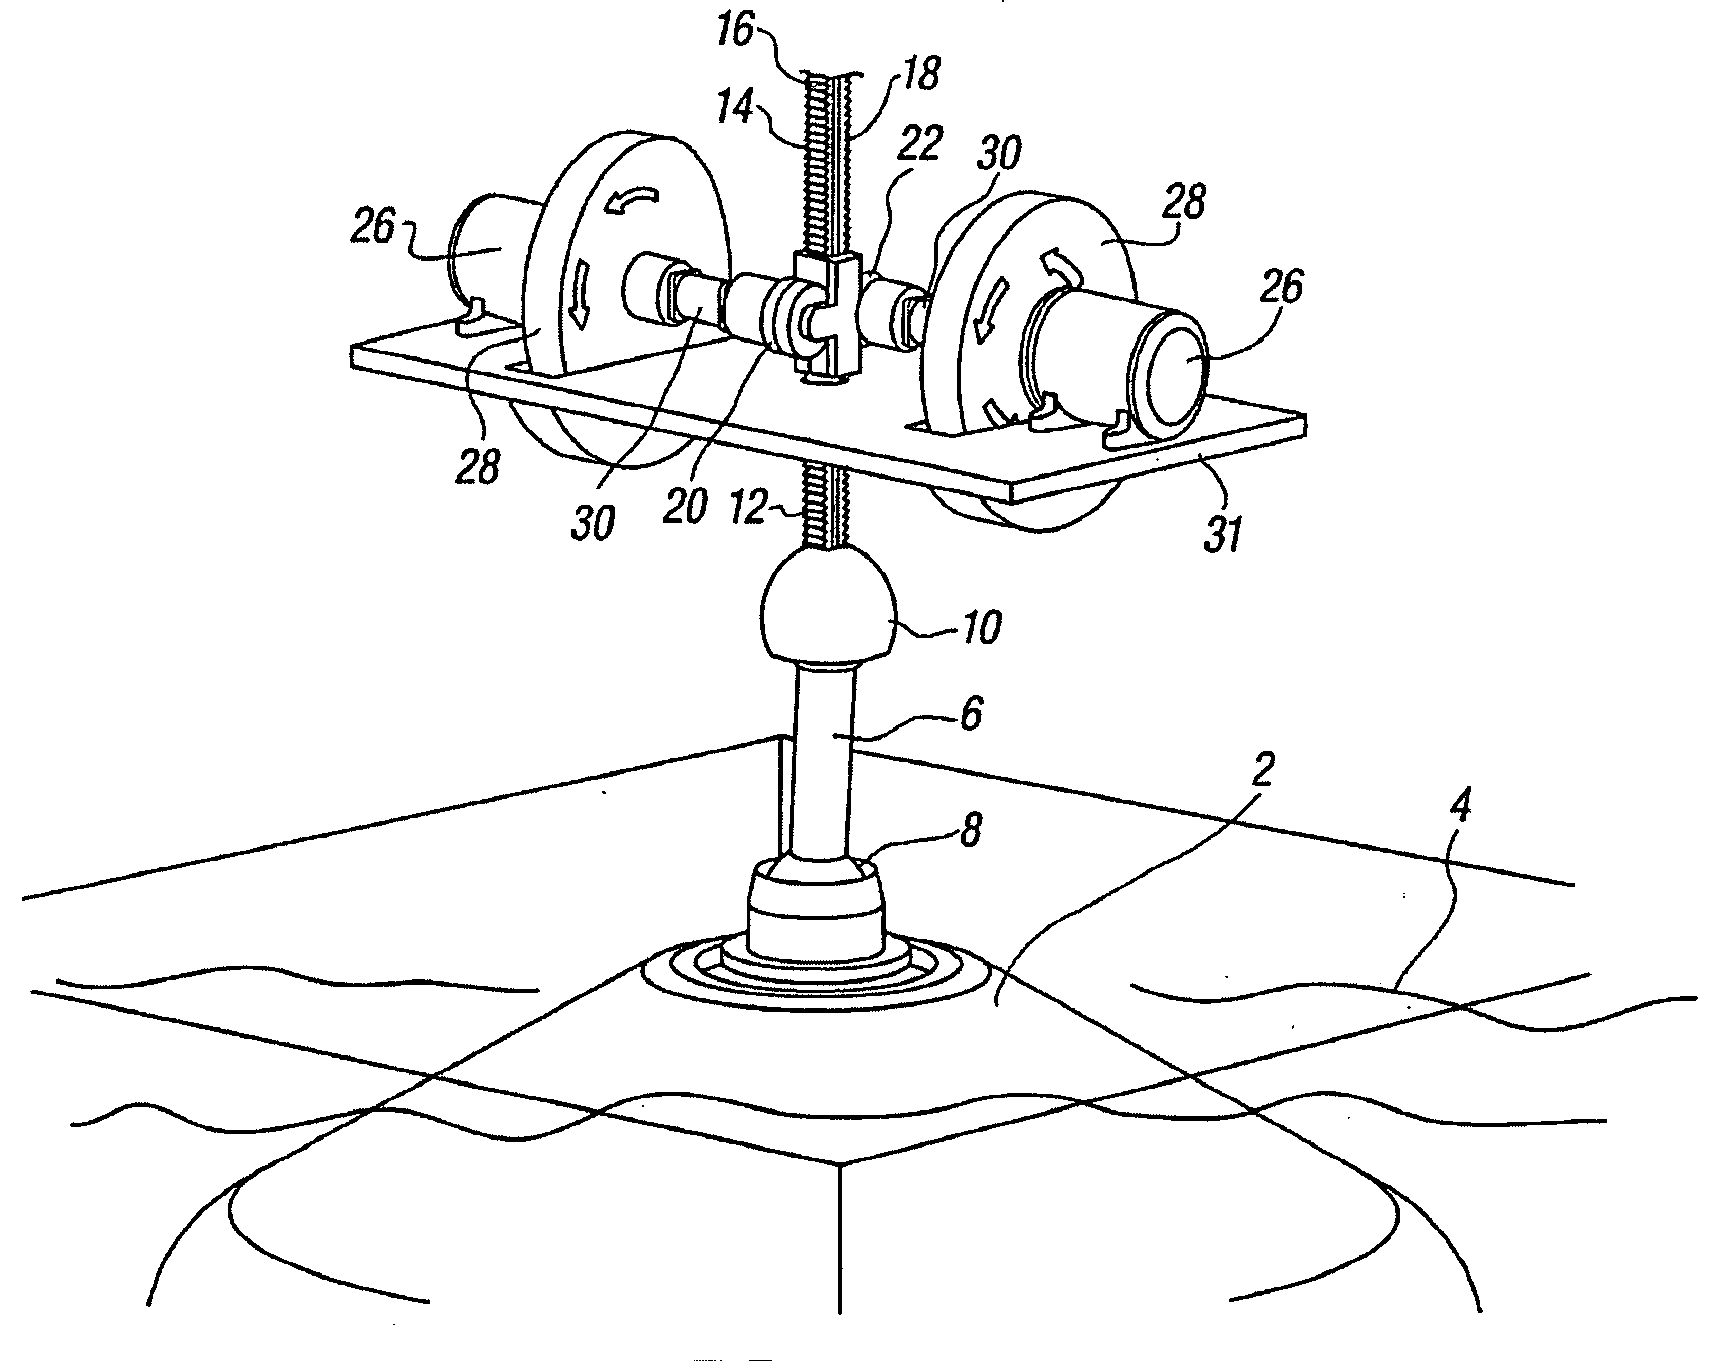 Movement and power generation apparatus